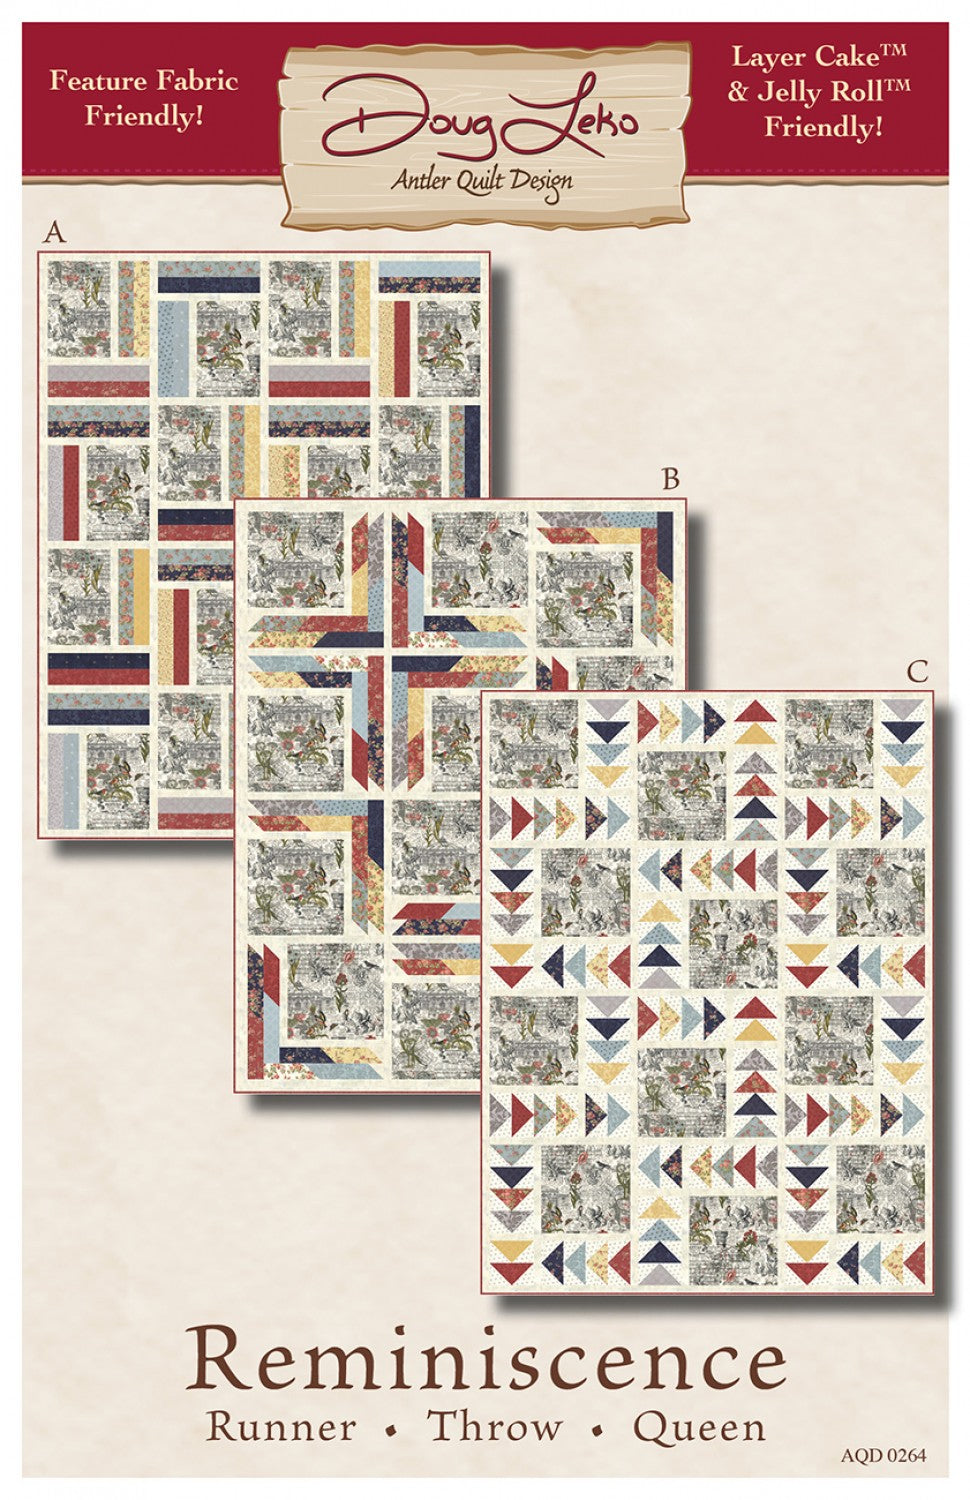 Reminiscence by Antler Quilt Design - PAPER Pattern